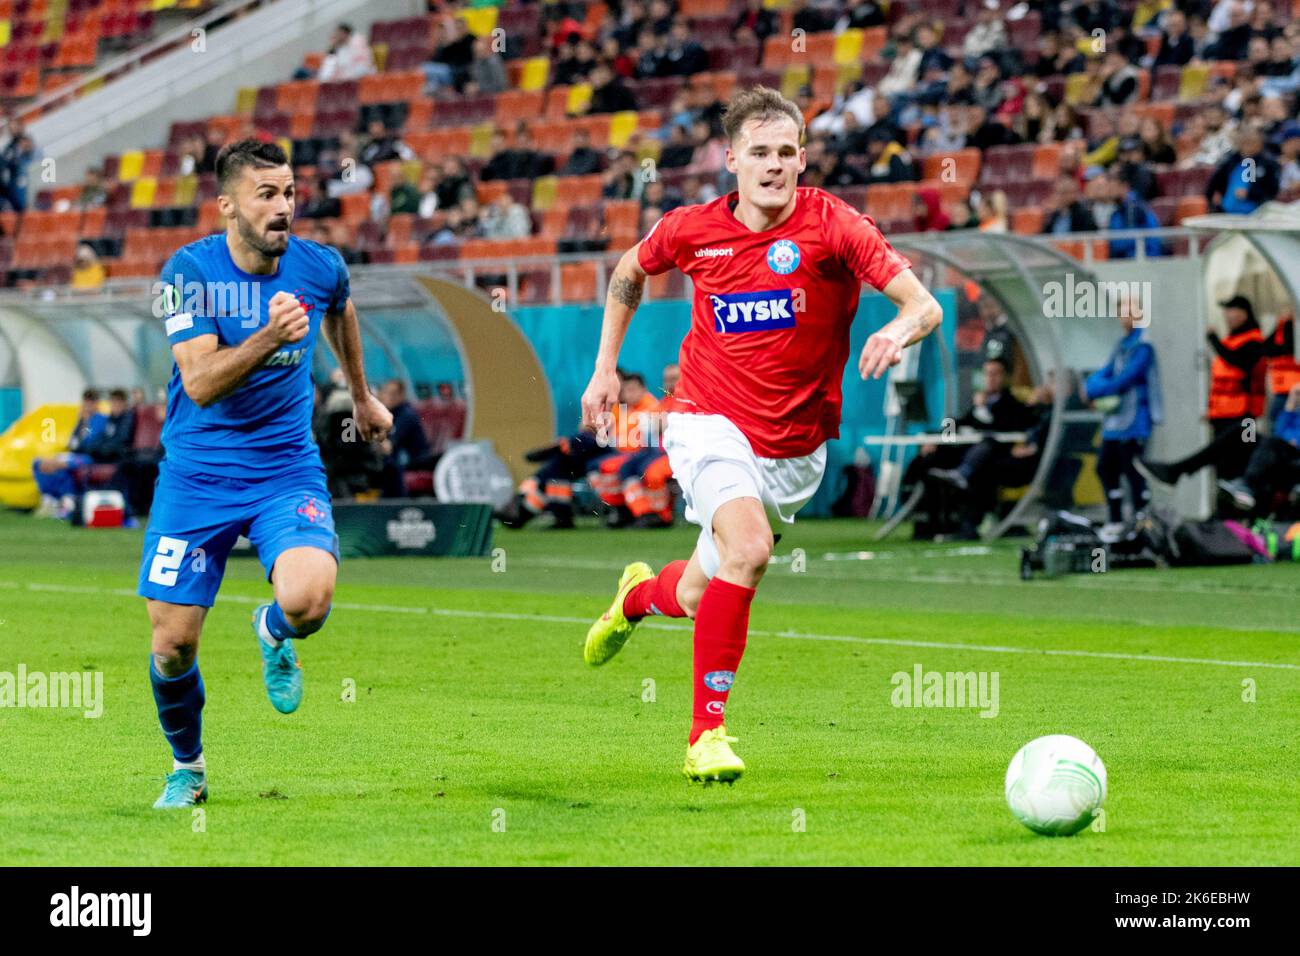 Bucharest, Romania. 14th Oct, 2022. October 14, 2022: Valentin Cretu #2 of FCSB and Lukas Engel #29 of Silkeborg IF during of the UEFA Europa Conference League group B match between FCSB Bucharest and Silkeborg IF at National Arena Stadium in Bucharest, Romania ROU. Catalin Soare/Cronos Credit: Cronos/Alamy Live News Stock Photo